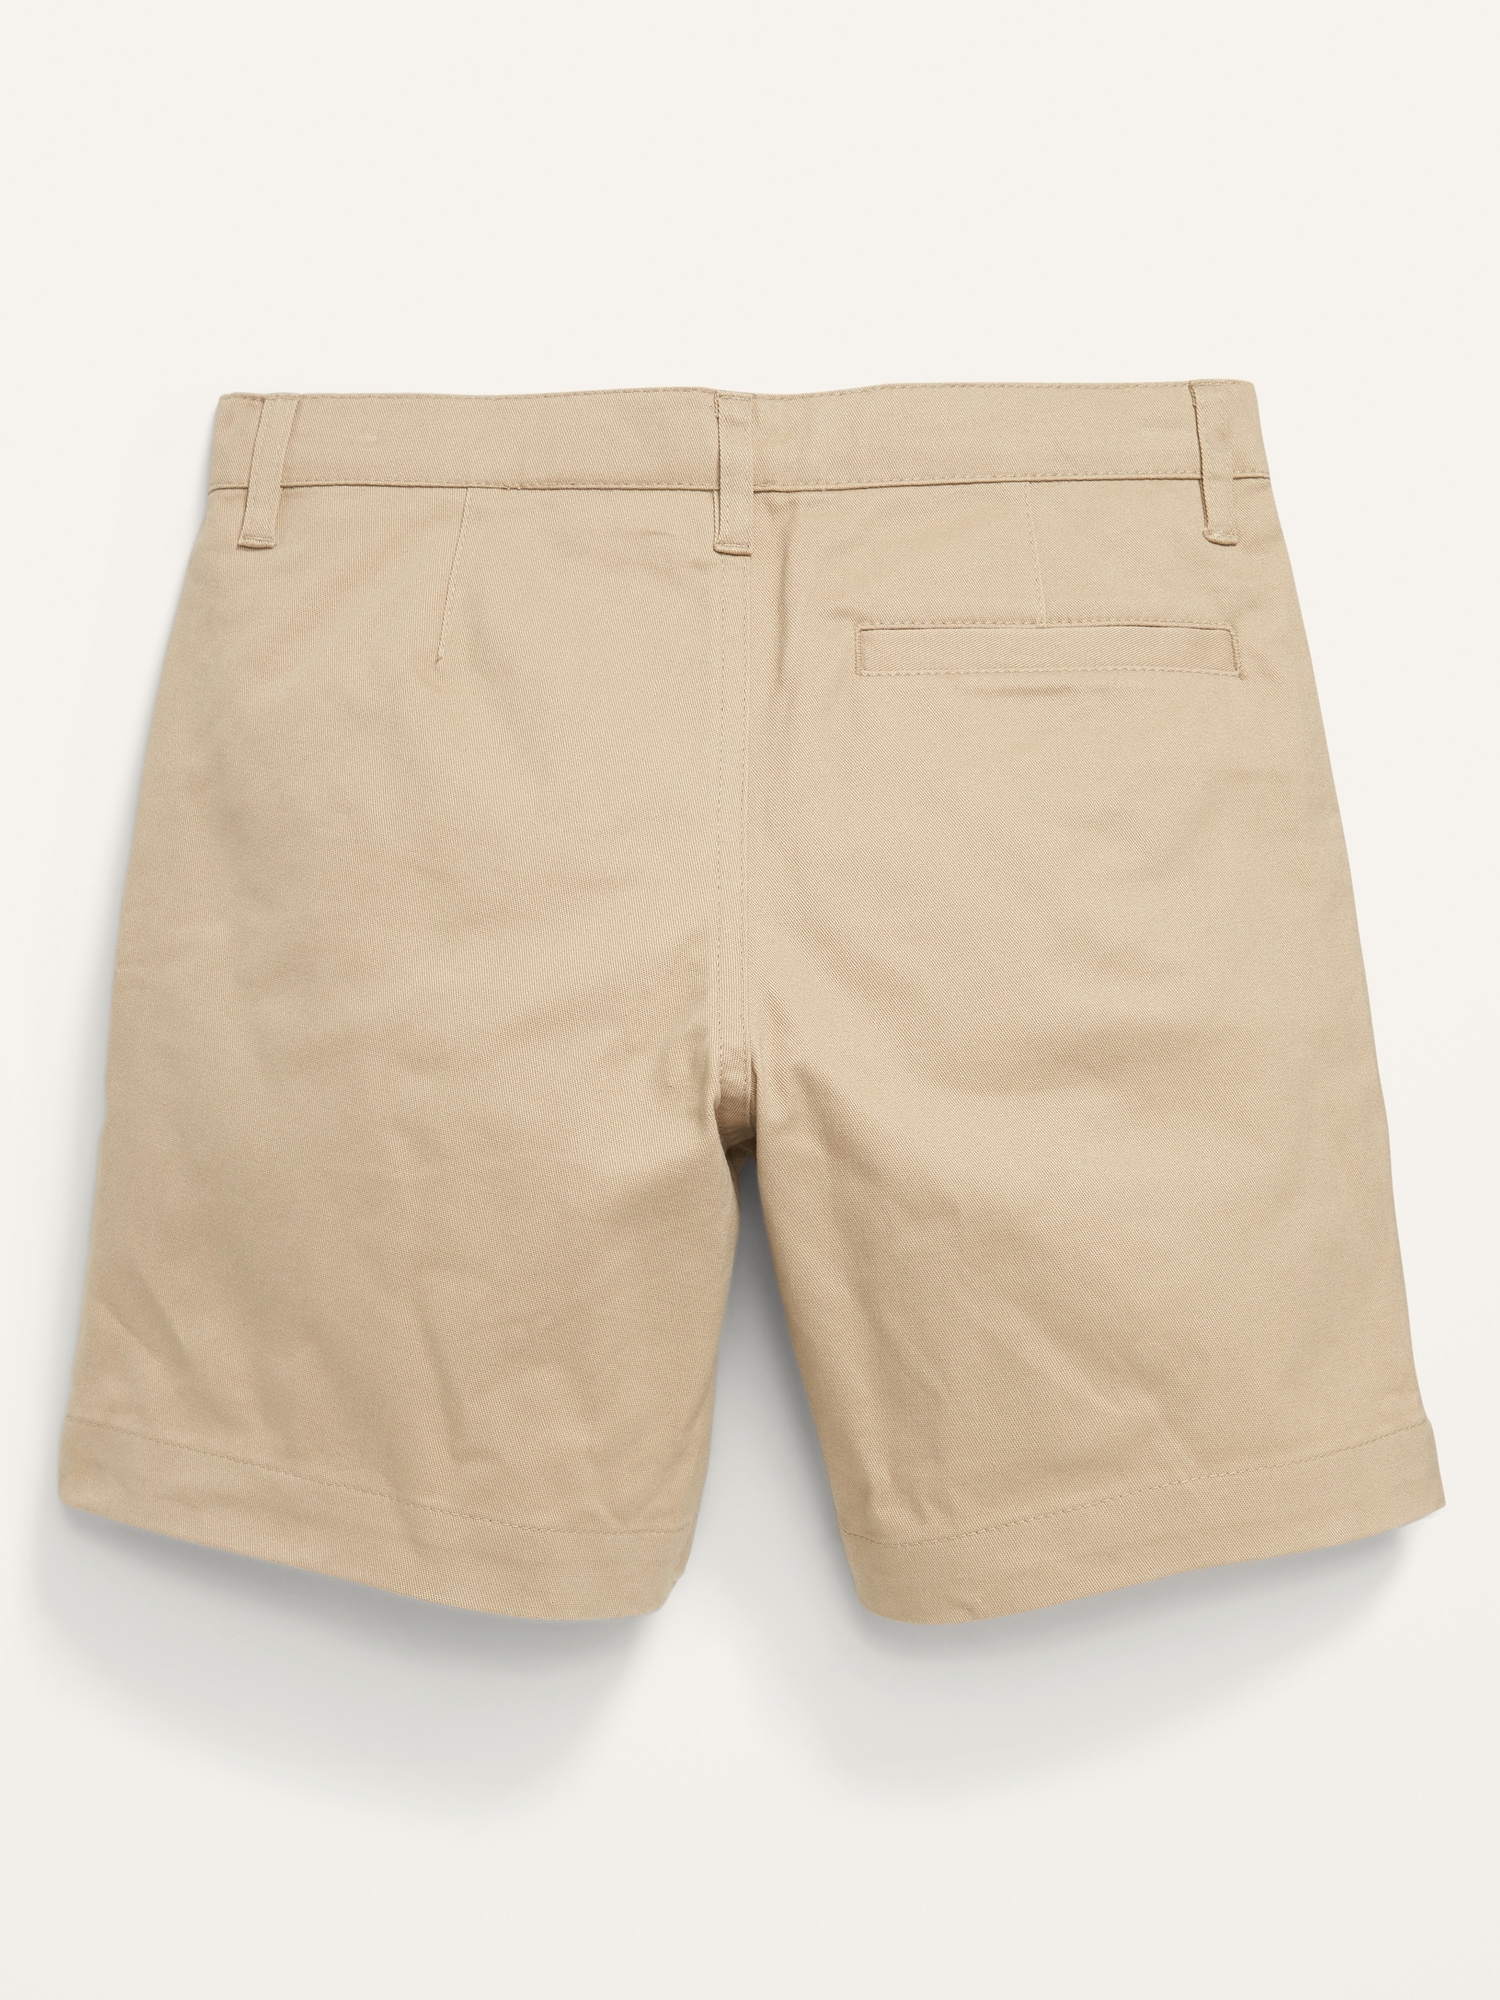 Built-In Flex Straight Twill Shorts for Boys (Above Knee)